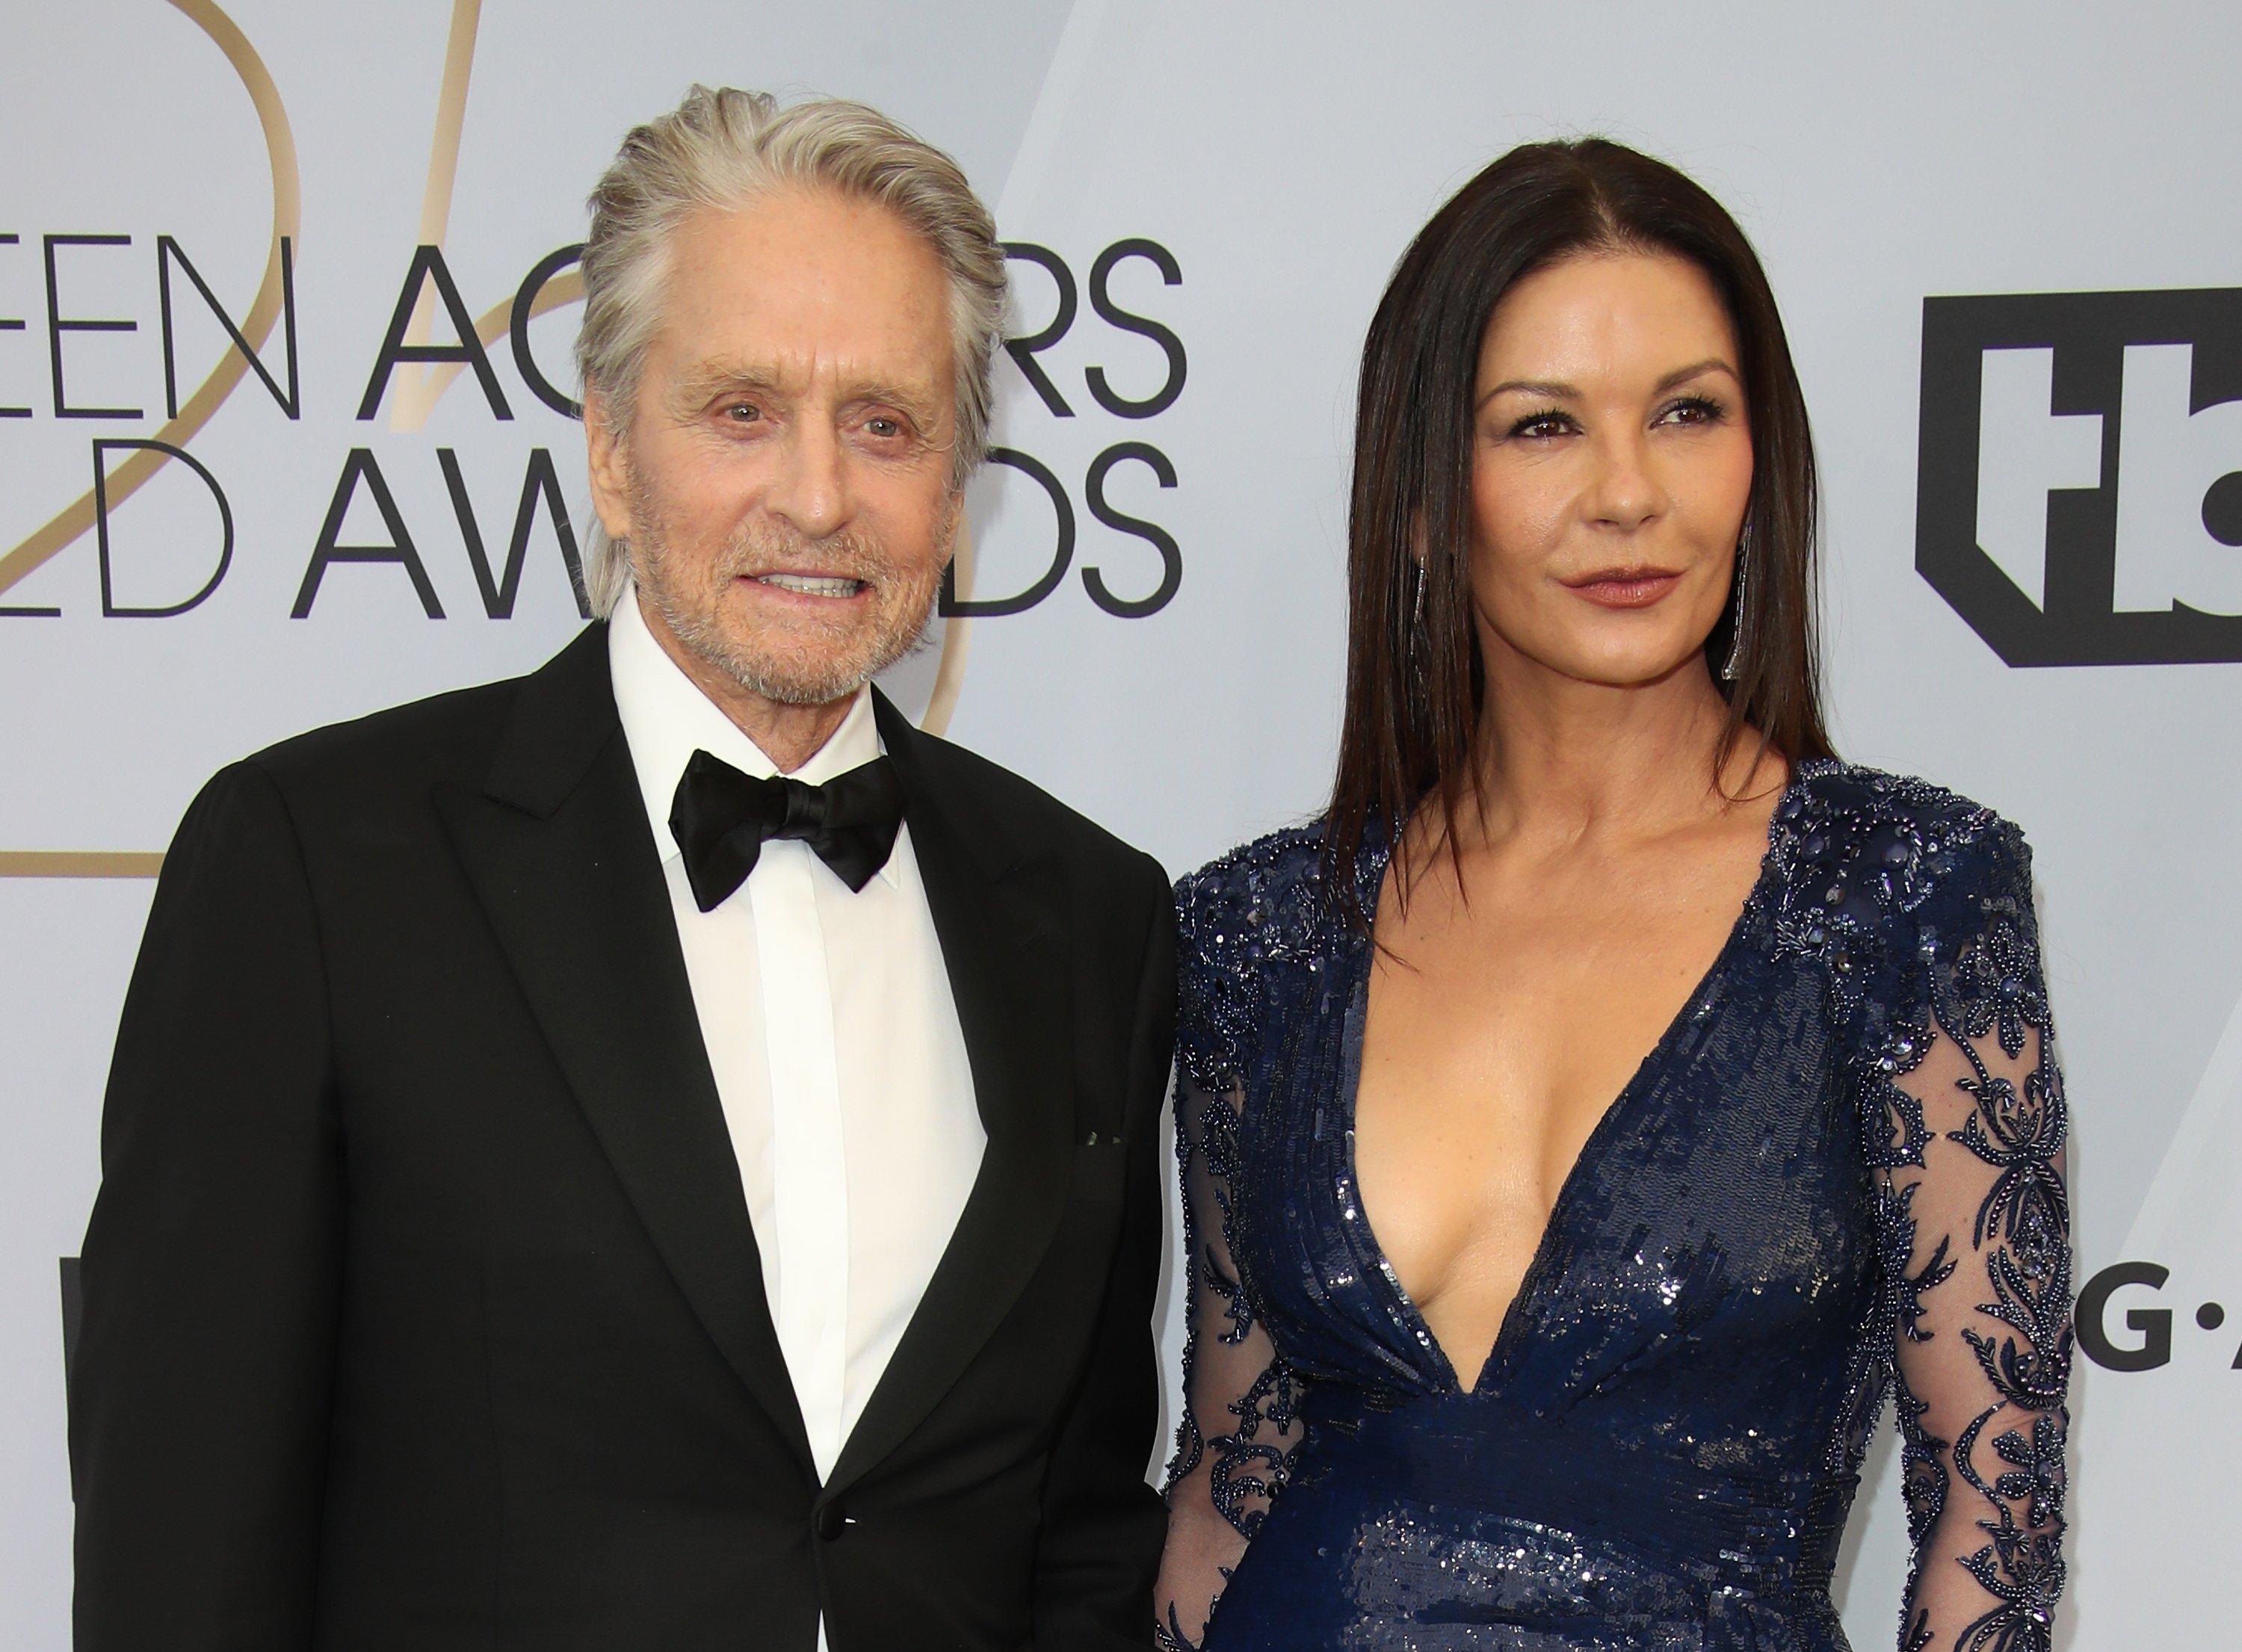 Michael Douglas and Catherine Zeta-Jones attend the 25th Annual Screen Actors Guild Awards at The Shrine Auditorium on January 27, 2019 in Los Angeles, California | Photo: Getty Images